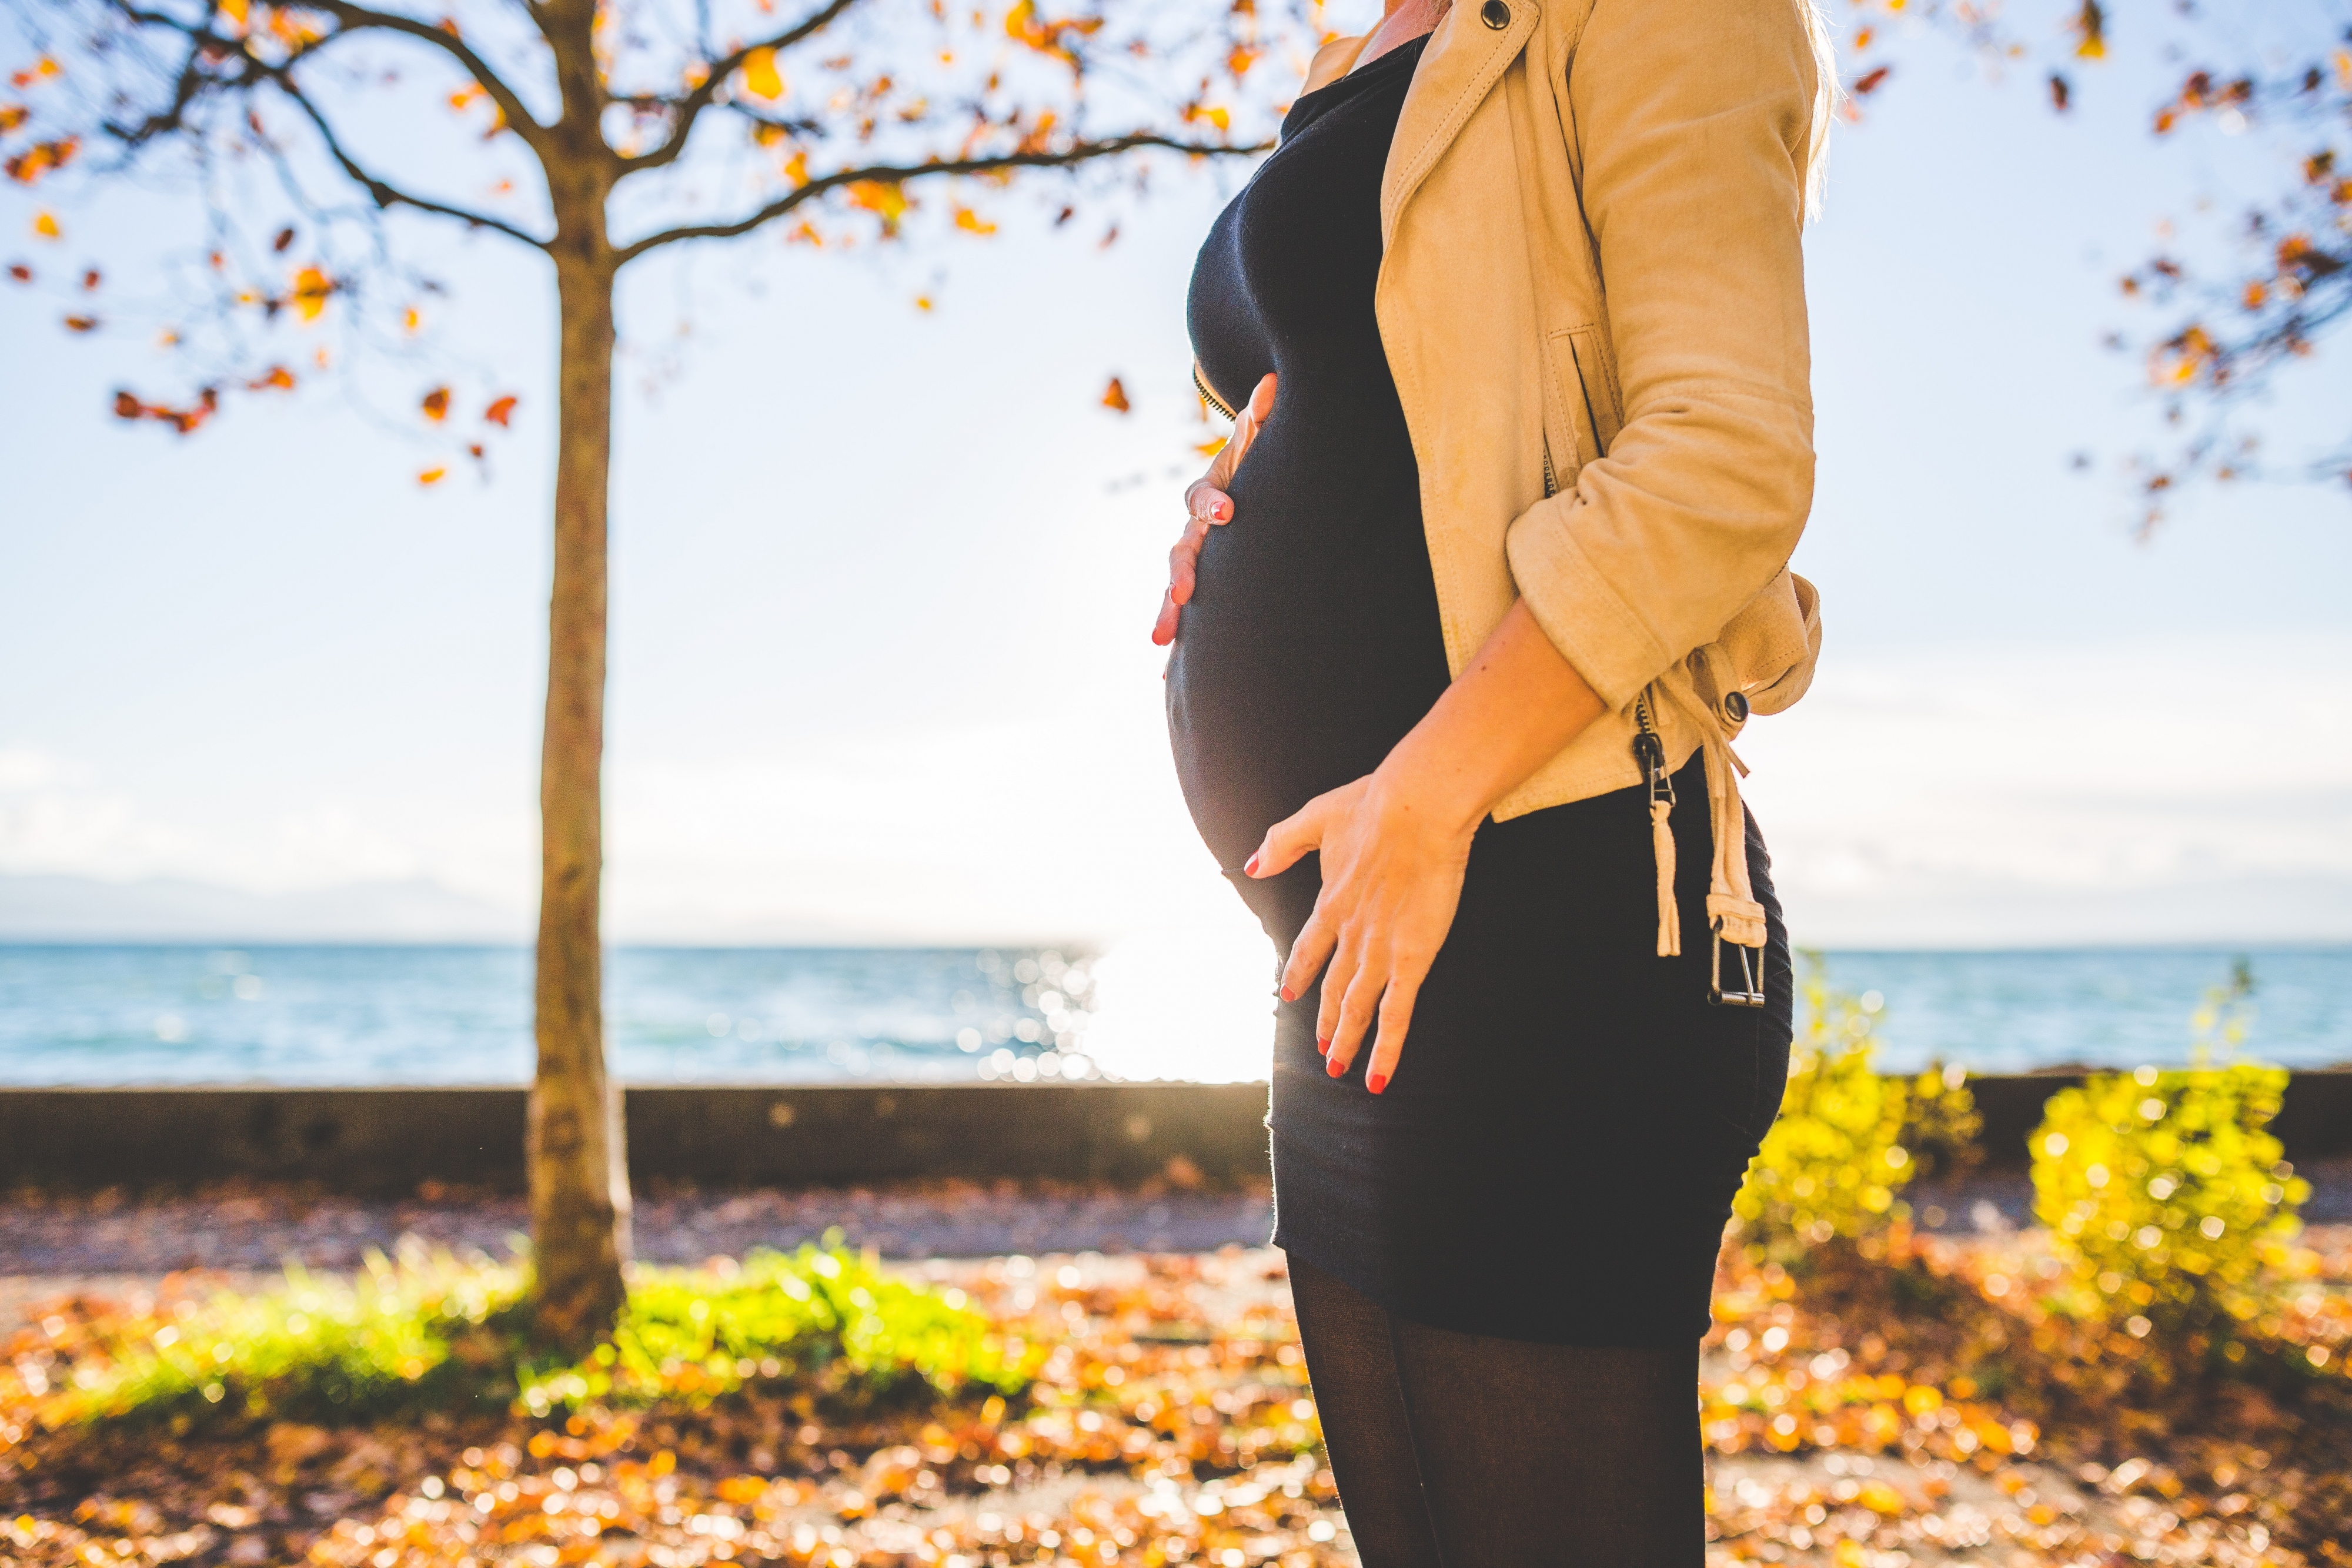 A pregnant woman in an autumnal setting